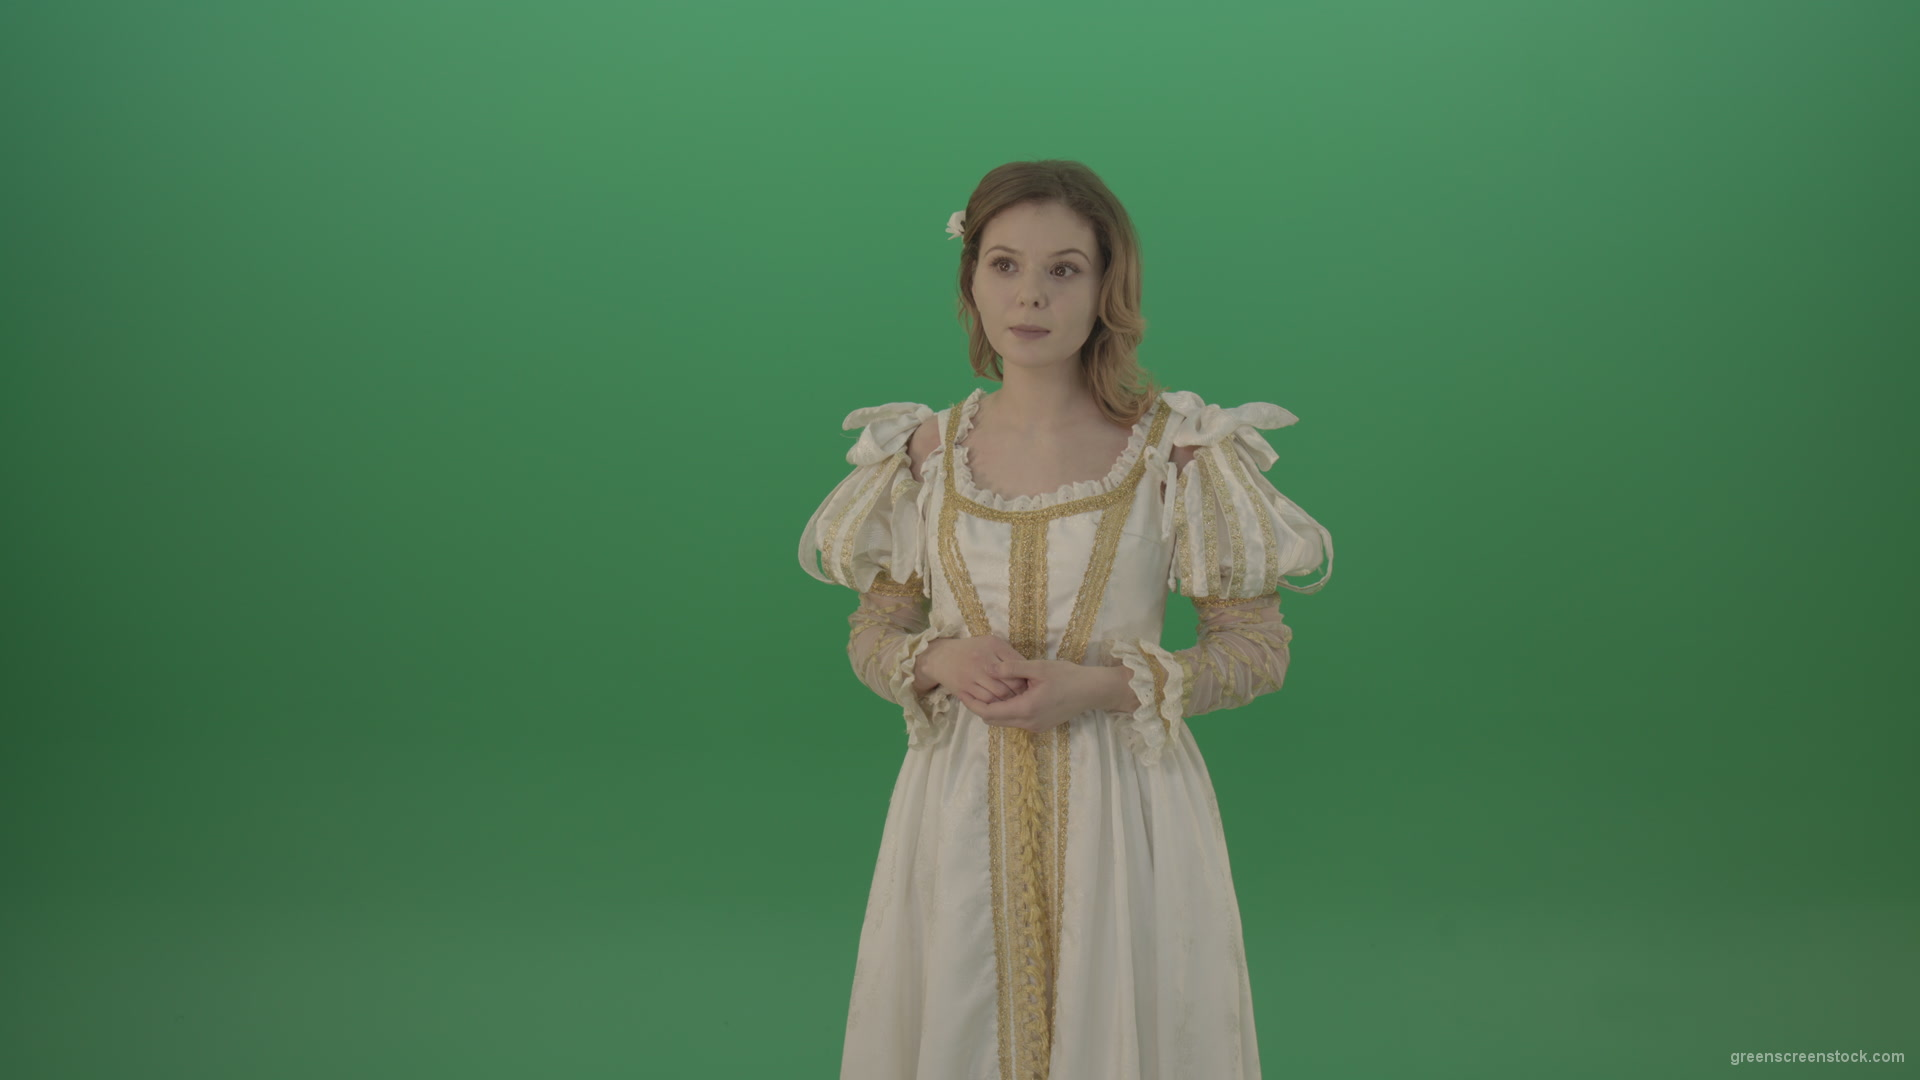 Medieval-girl-in-a-white-suit-looking-far-away-isolated-on-green-background_001 Green Screen Stock